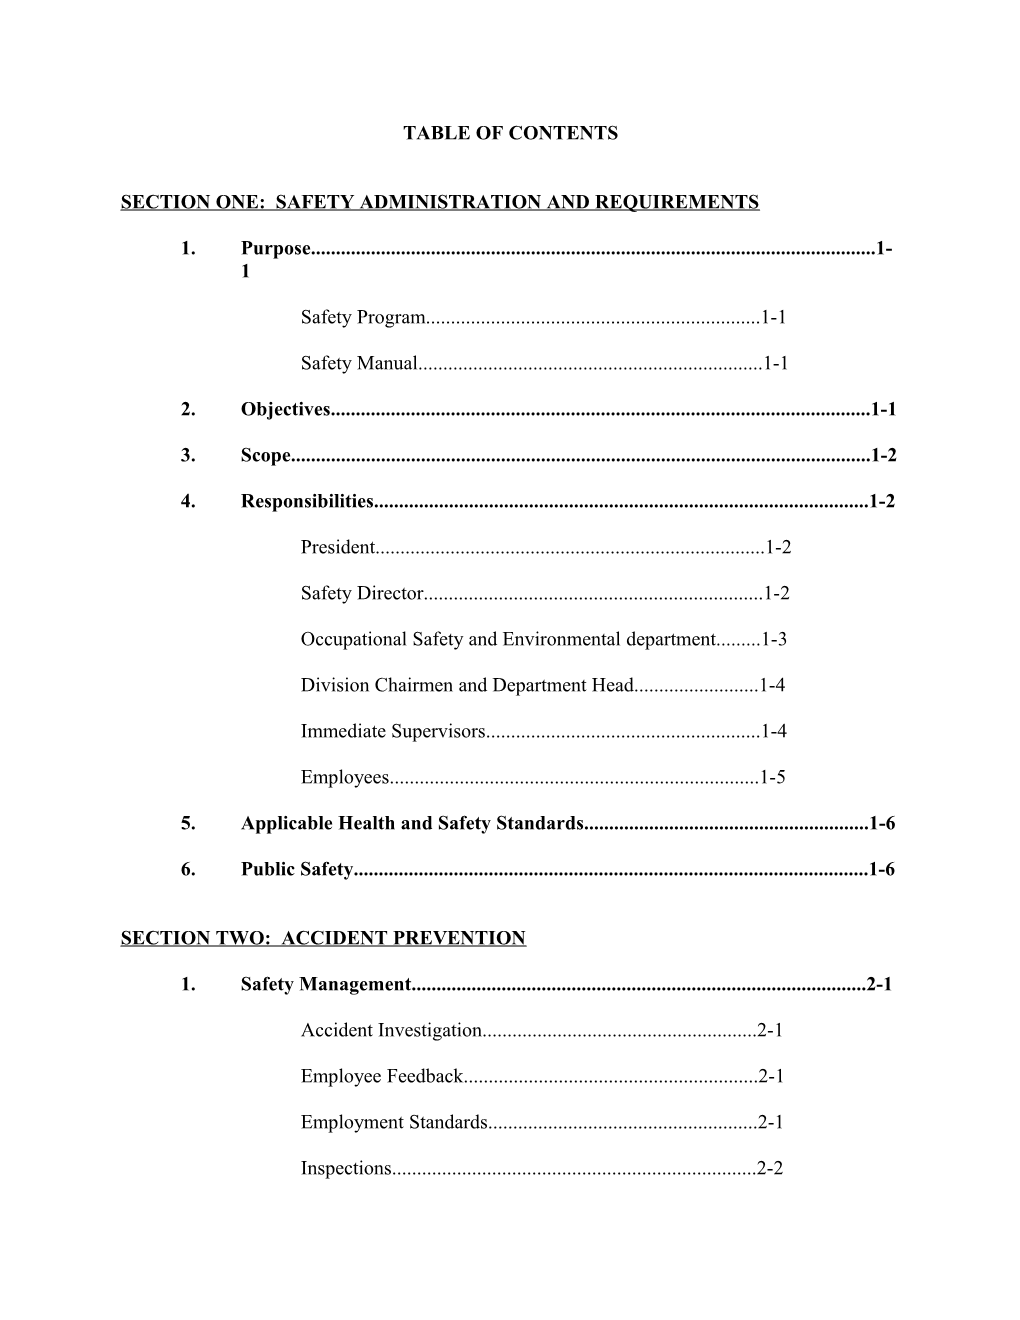 Section One: Safety Administration and Requirements